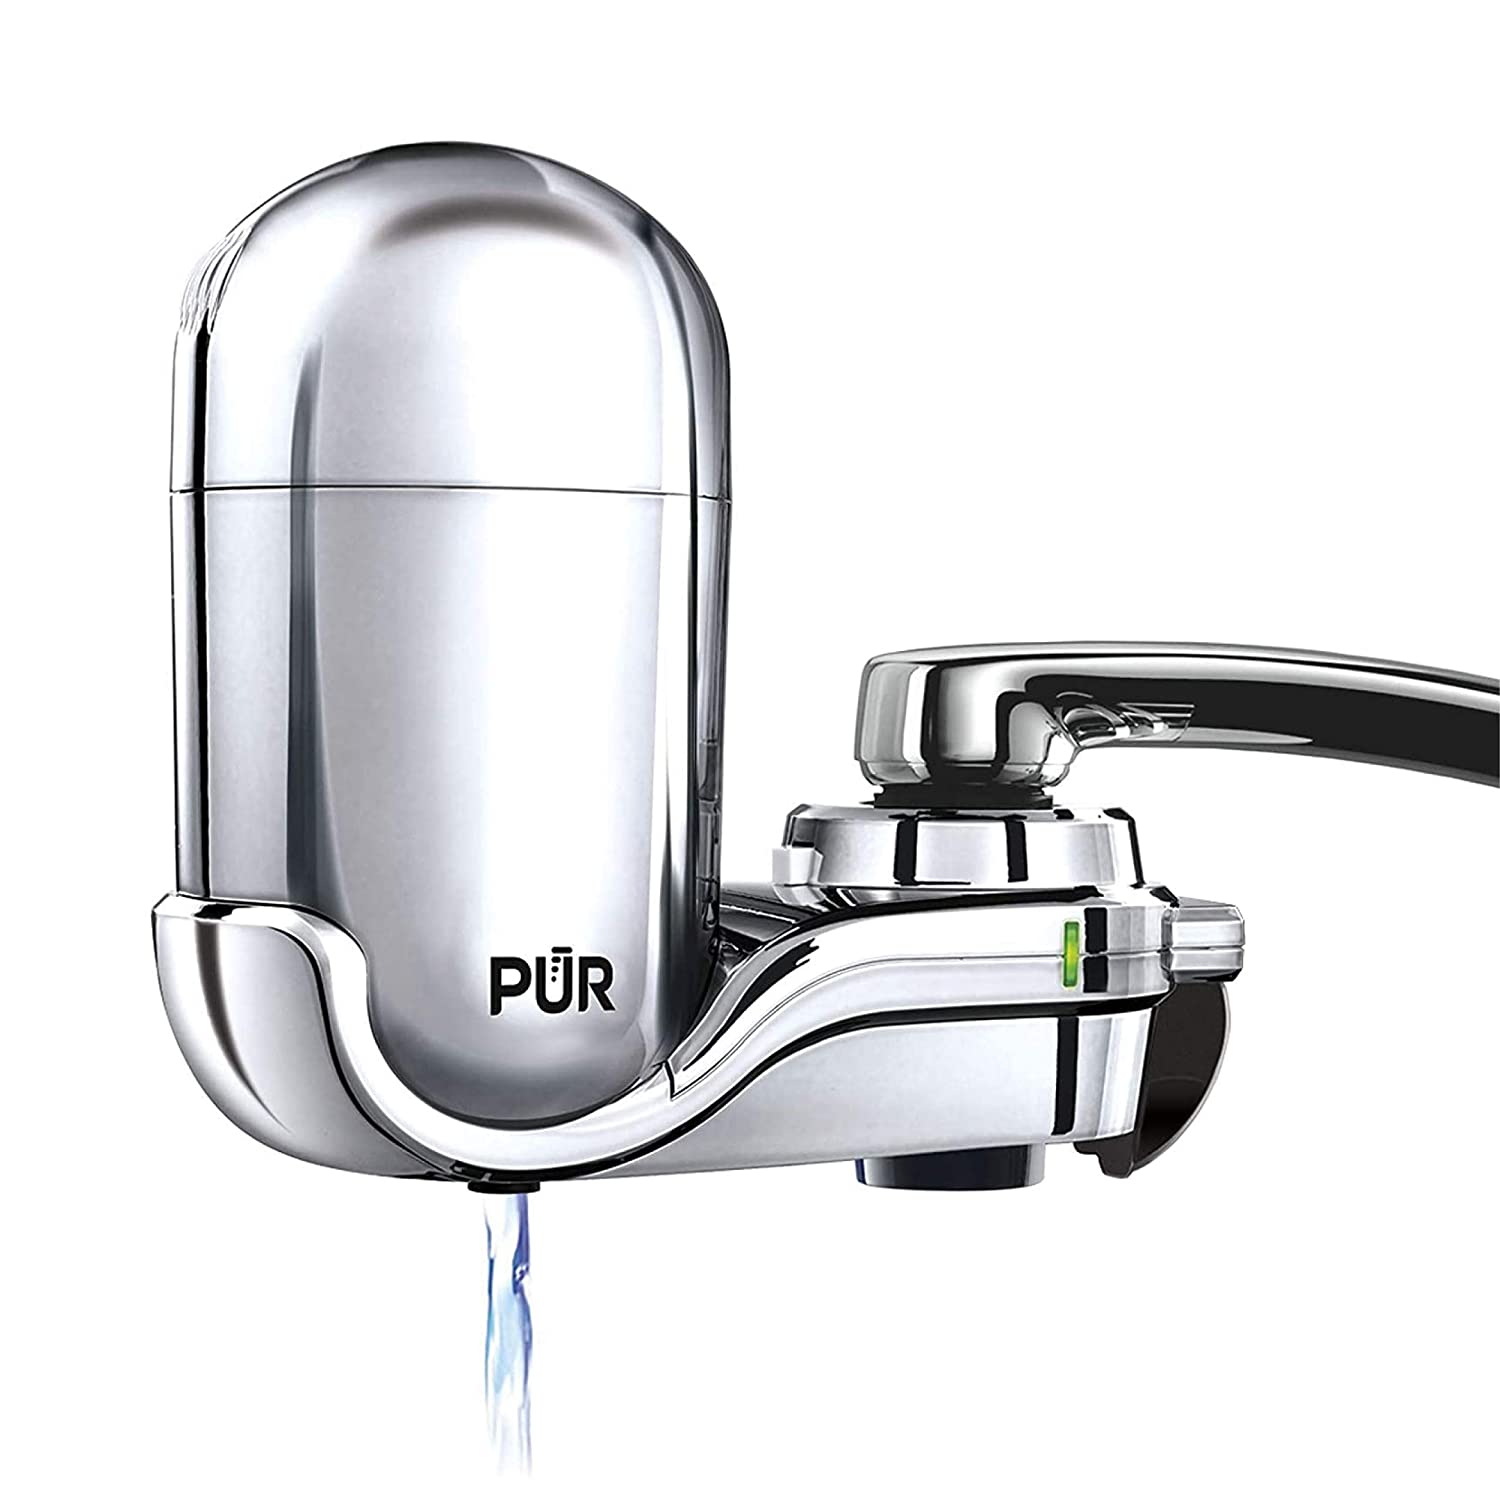 Pur fm 3700 advanced faucet water filter